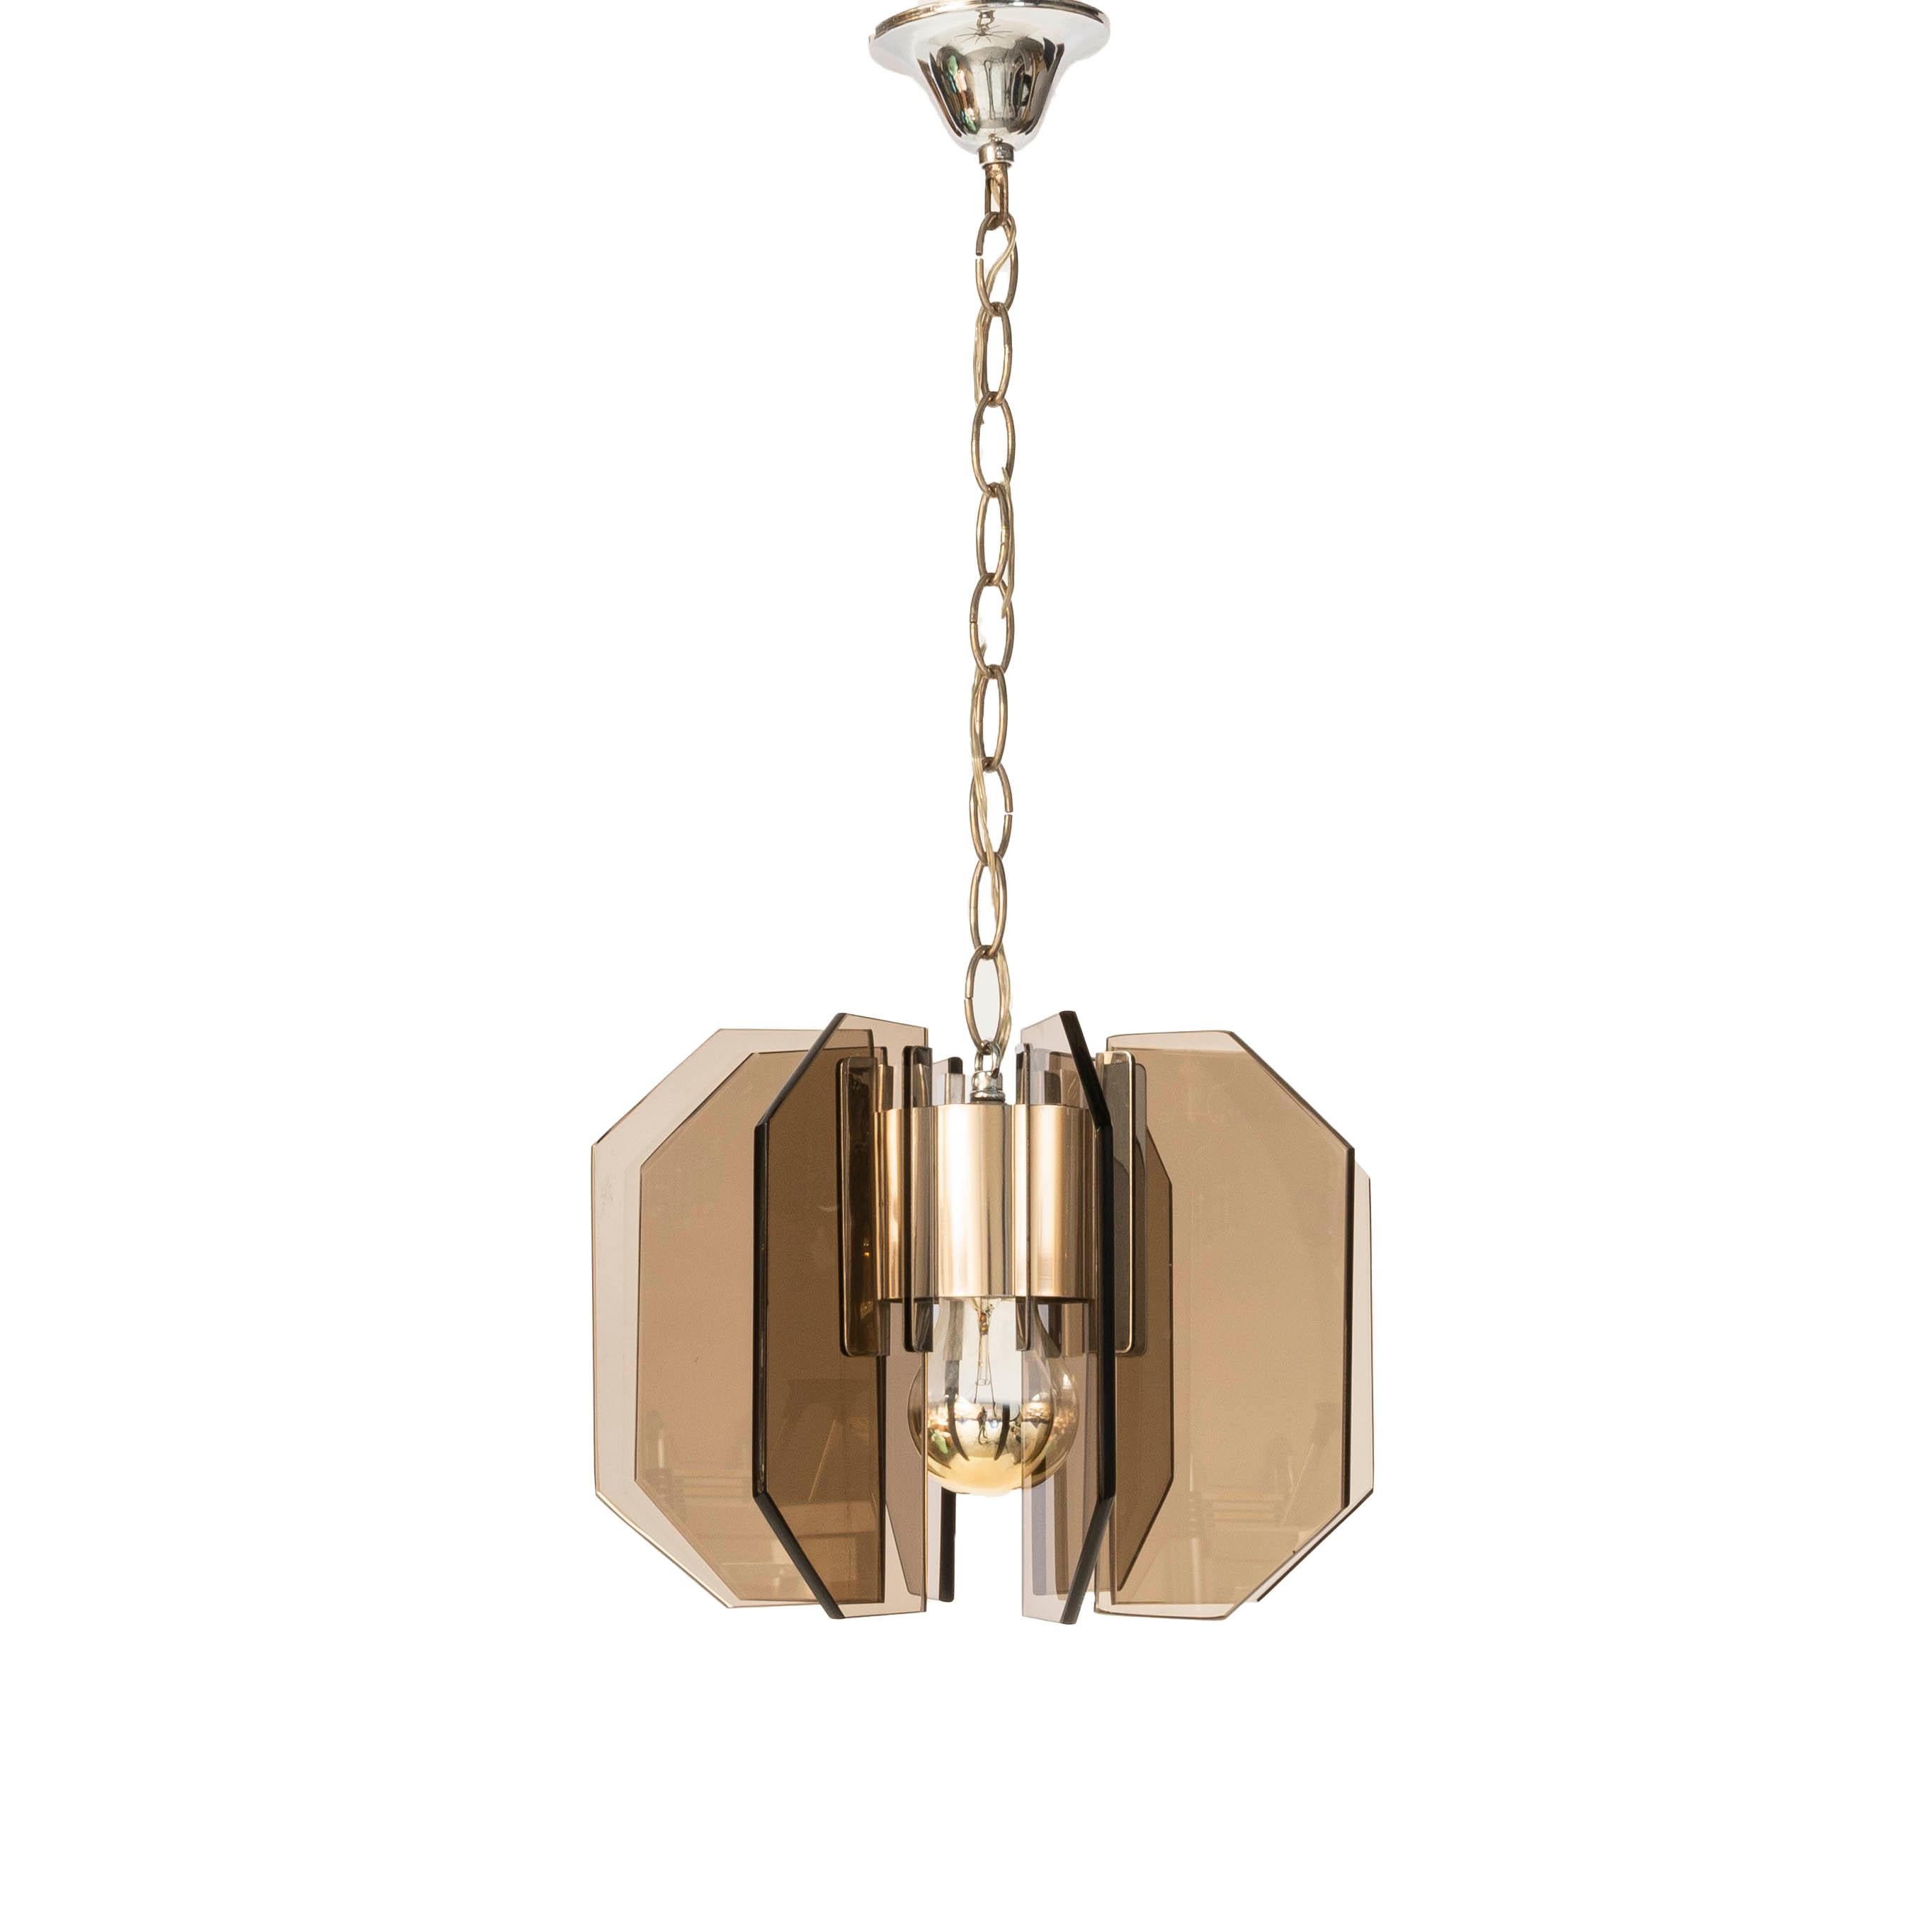 Majestic one-light pendant, 8 smokey glass panels attached to the chrome center, circa 1970s and in good condition. Attributed to Veca.
Height without chain 20cm, 8 glass.